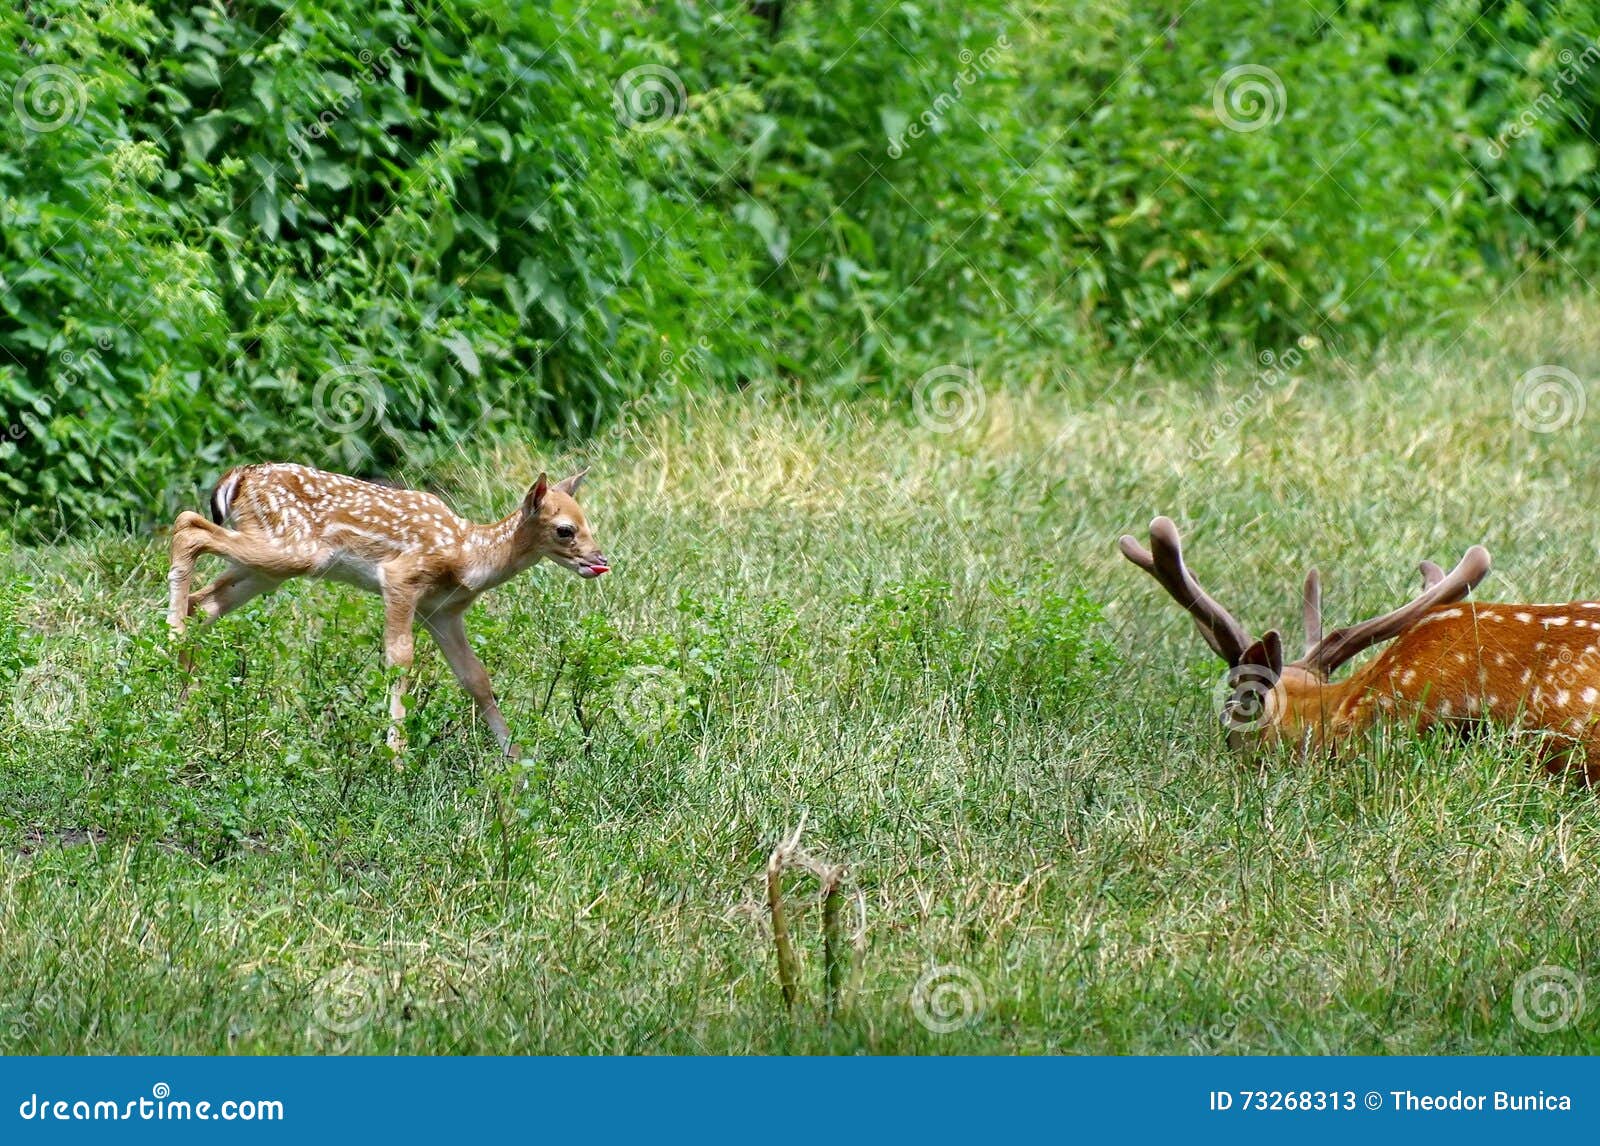 wild animal. family in green grass. baby deer and his father